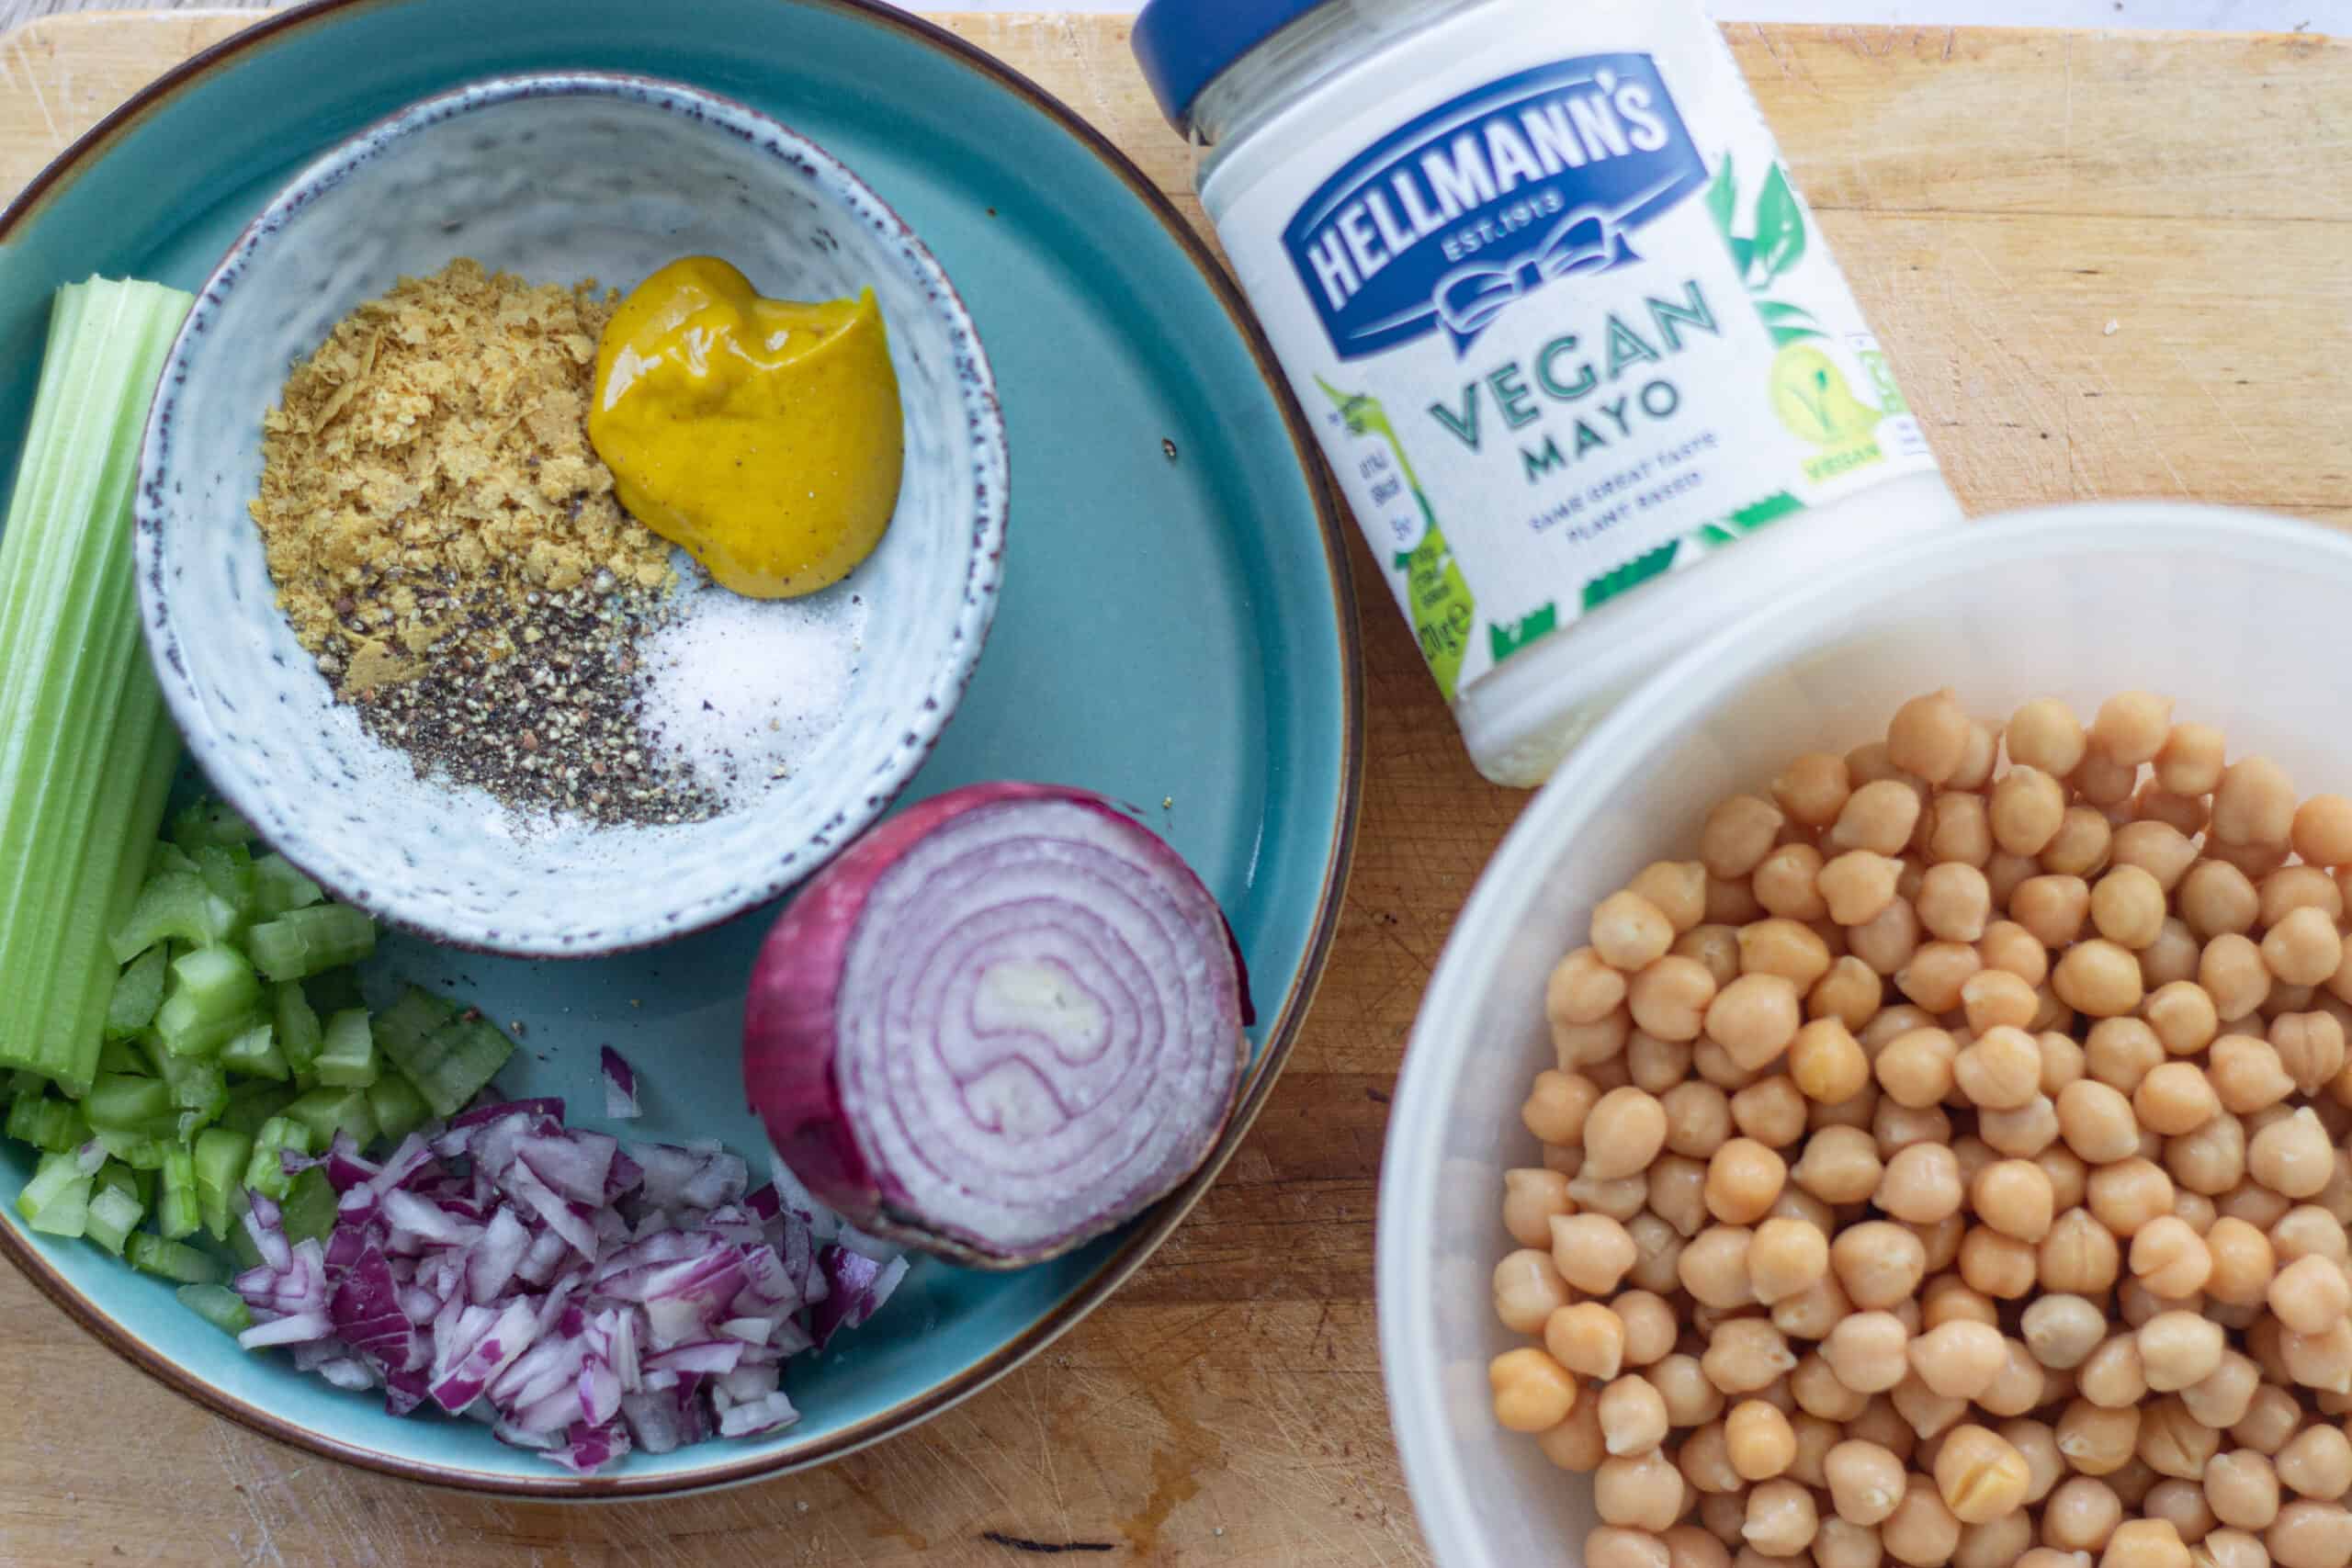 Ingredients for Chickpea Tuna